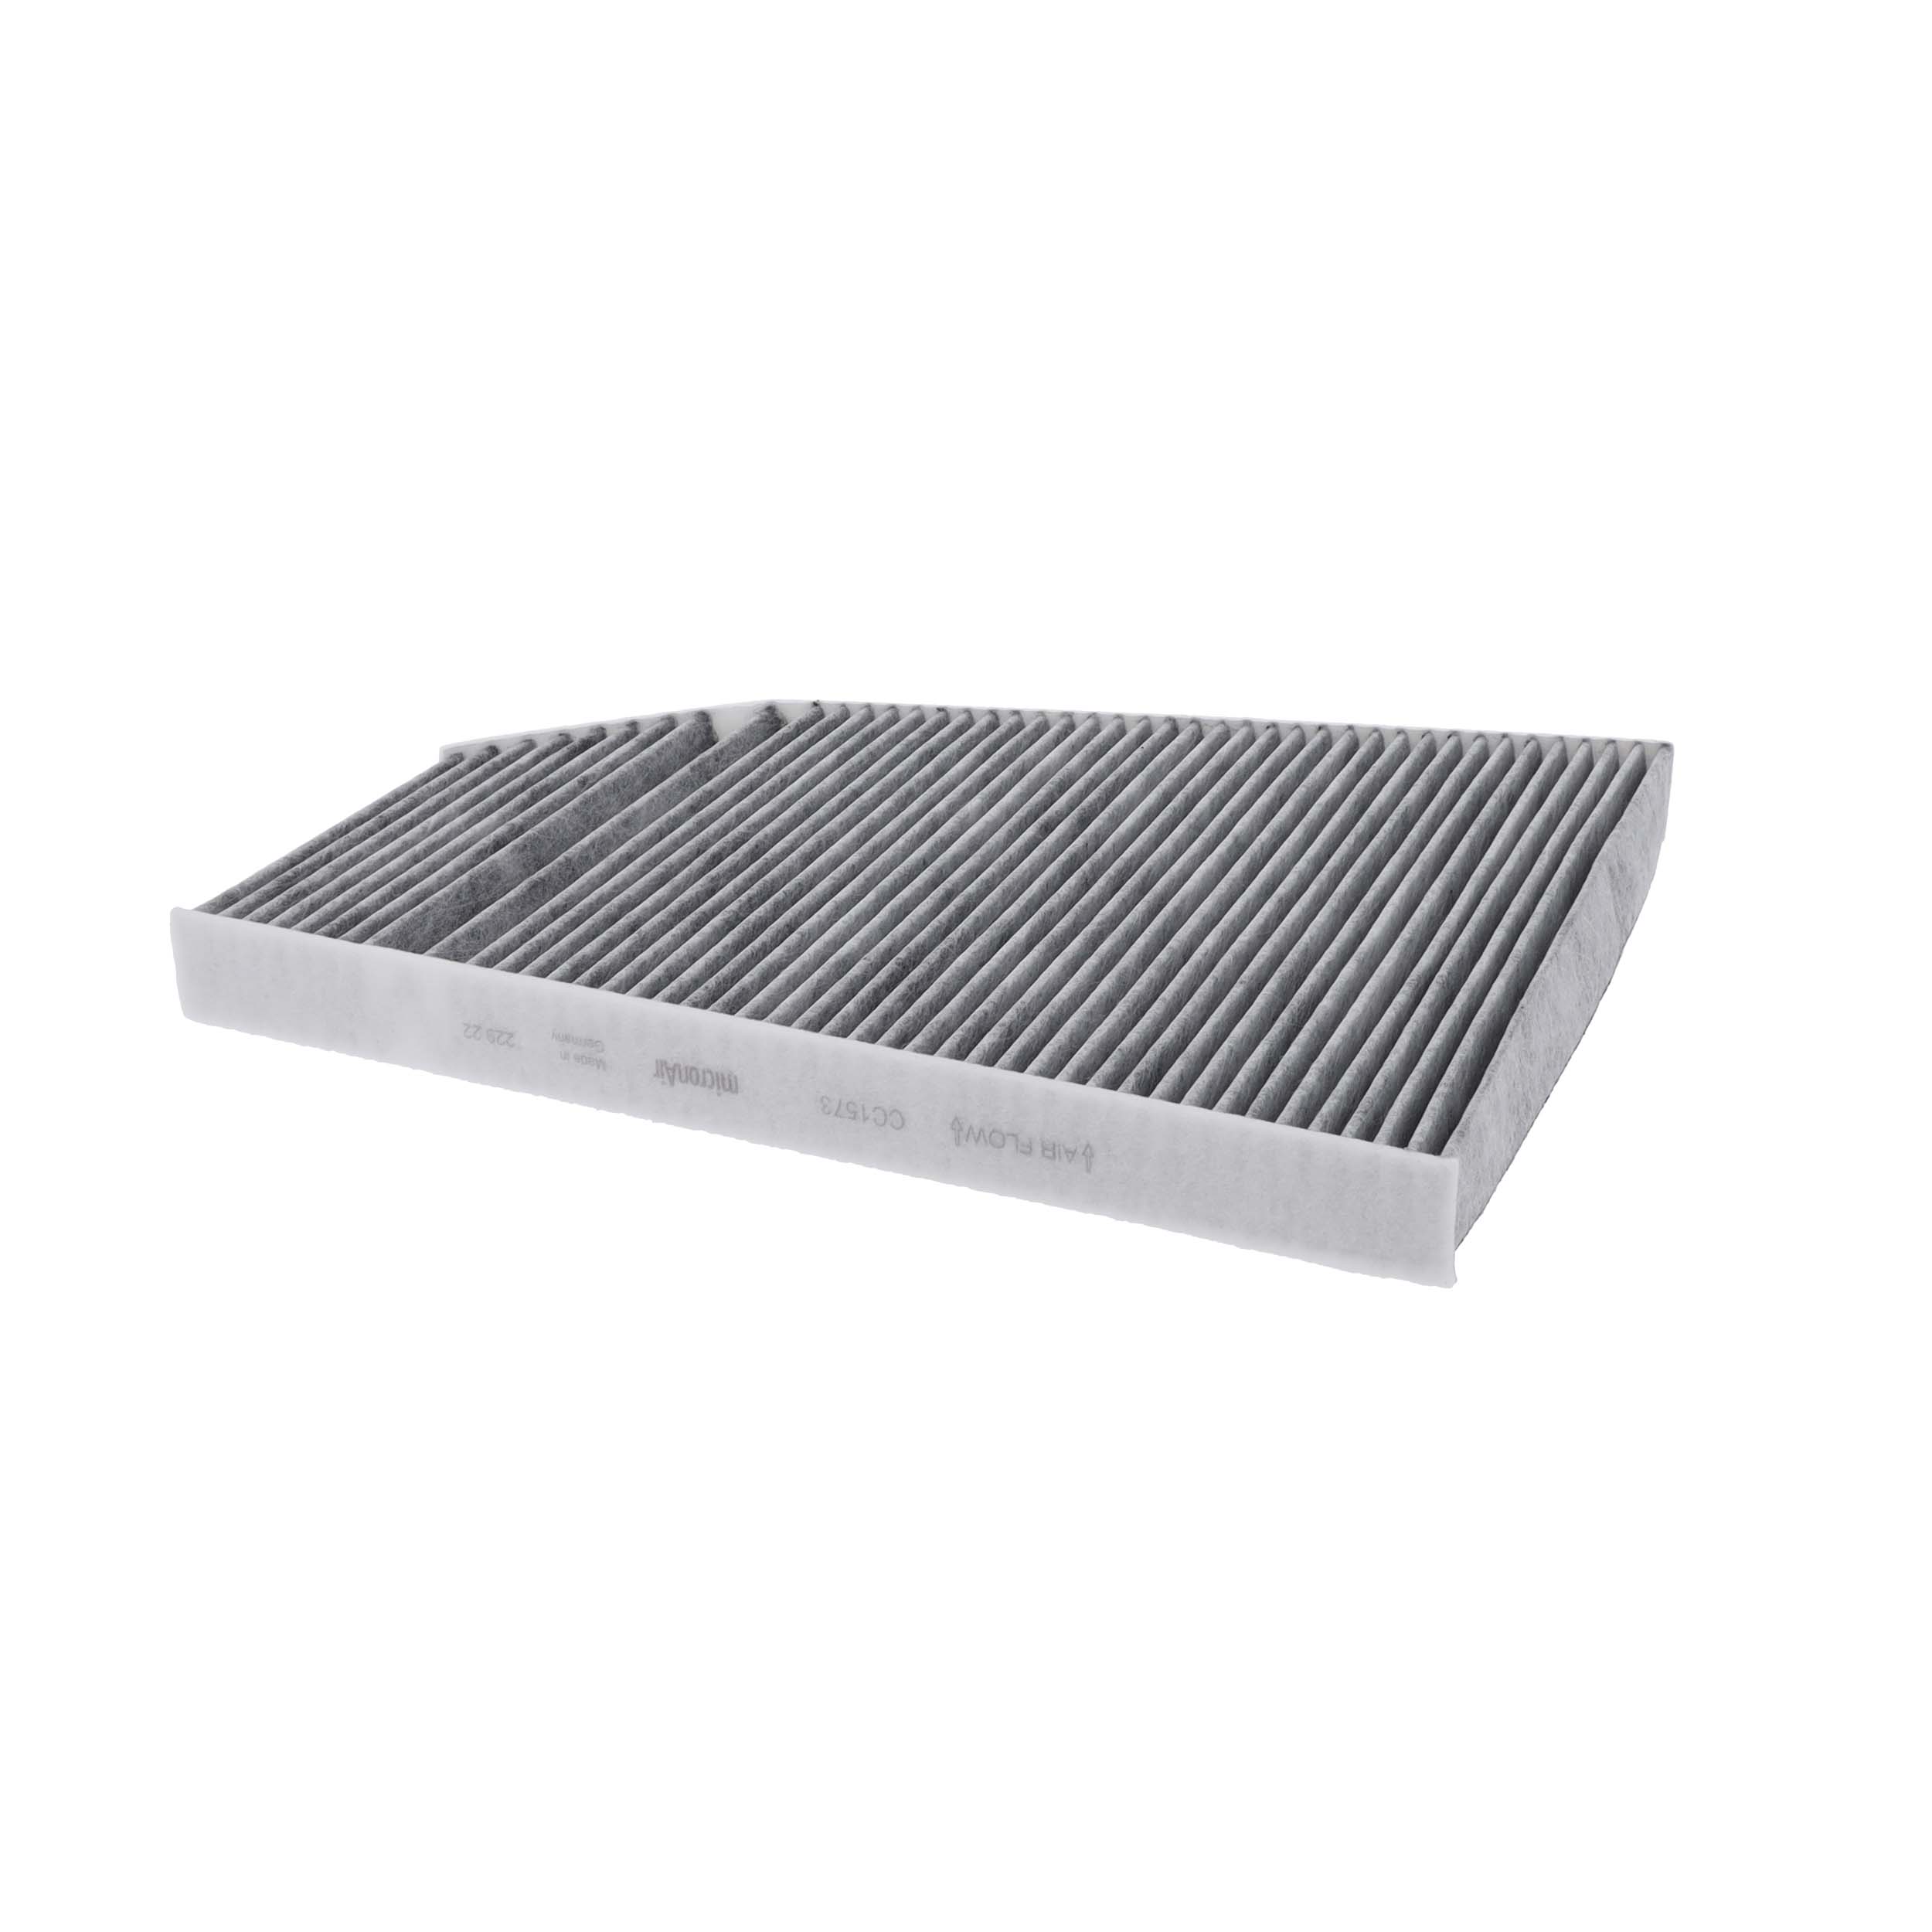 CC1573 CORTECO Activated Carbon Filter, 322 mm x 260 mm x 30 mm Width: 260mm, Height: 30mm, Length: 322mm Cabin filter 49440471 buy